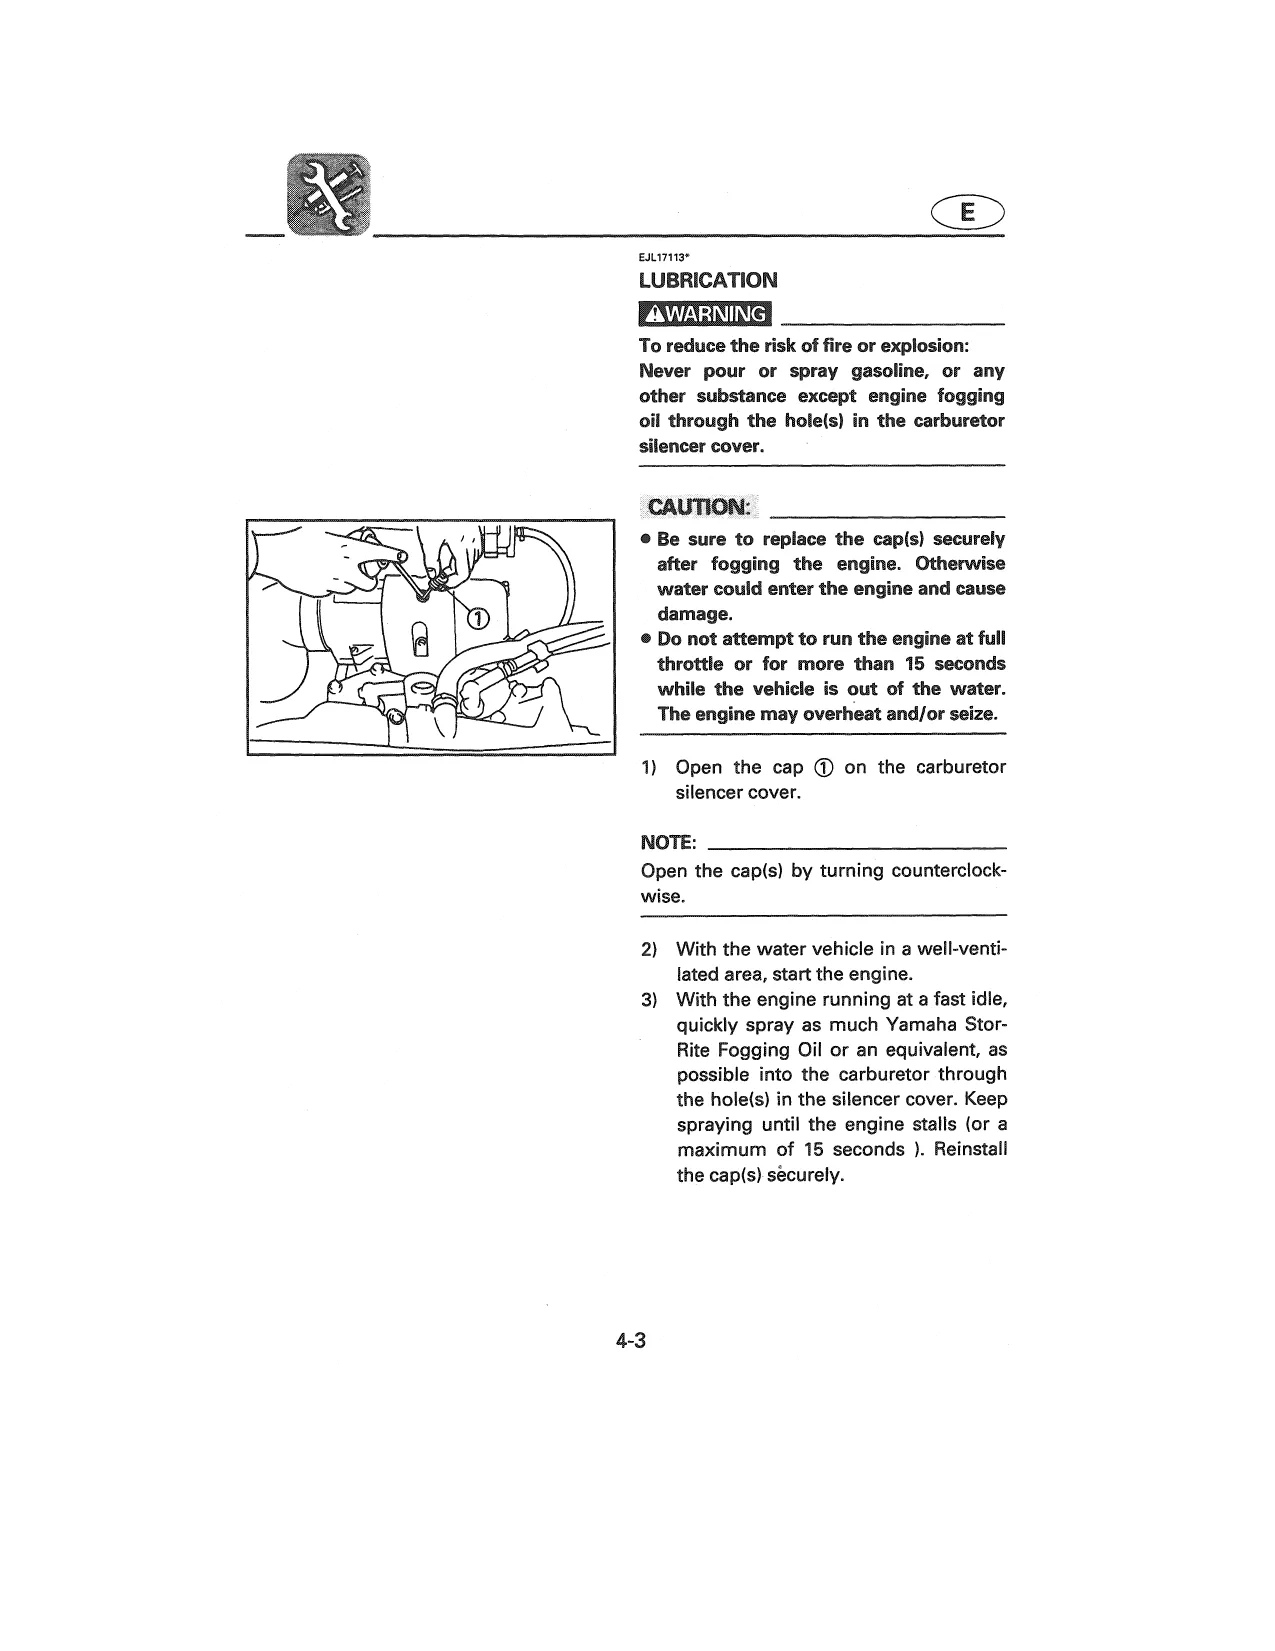 1987-1993 Yamaha Wavejammer 500, Waverunner 500, Waverunner 650, Waverunner 650 LX service manual Preview image 5